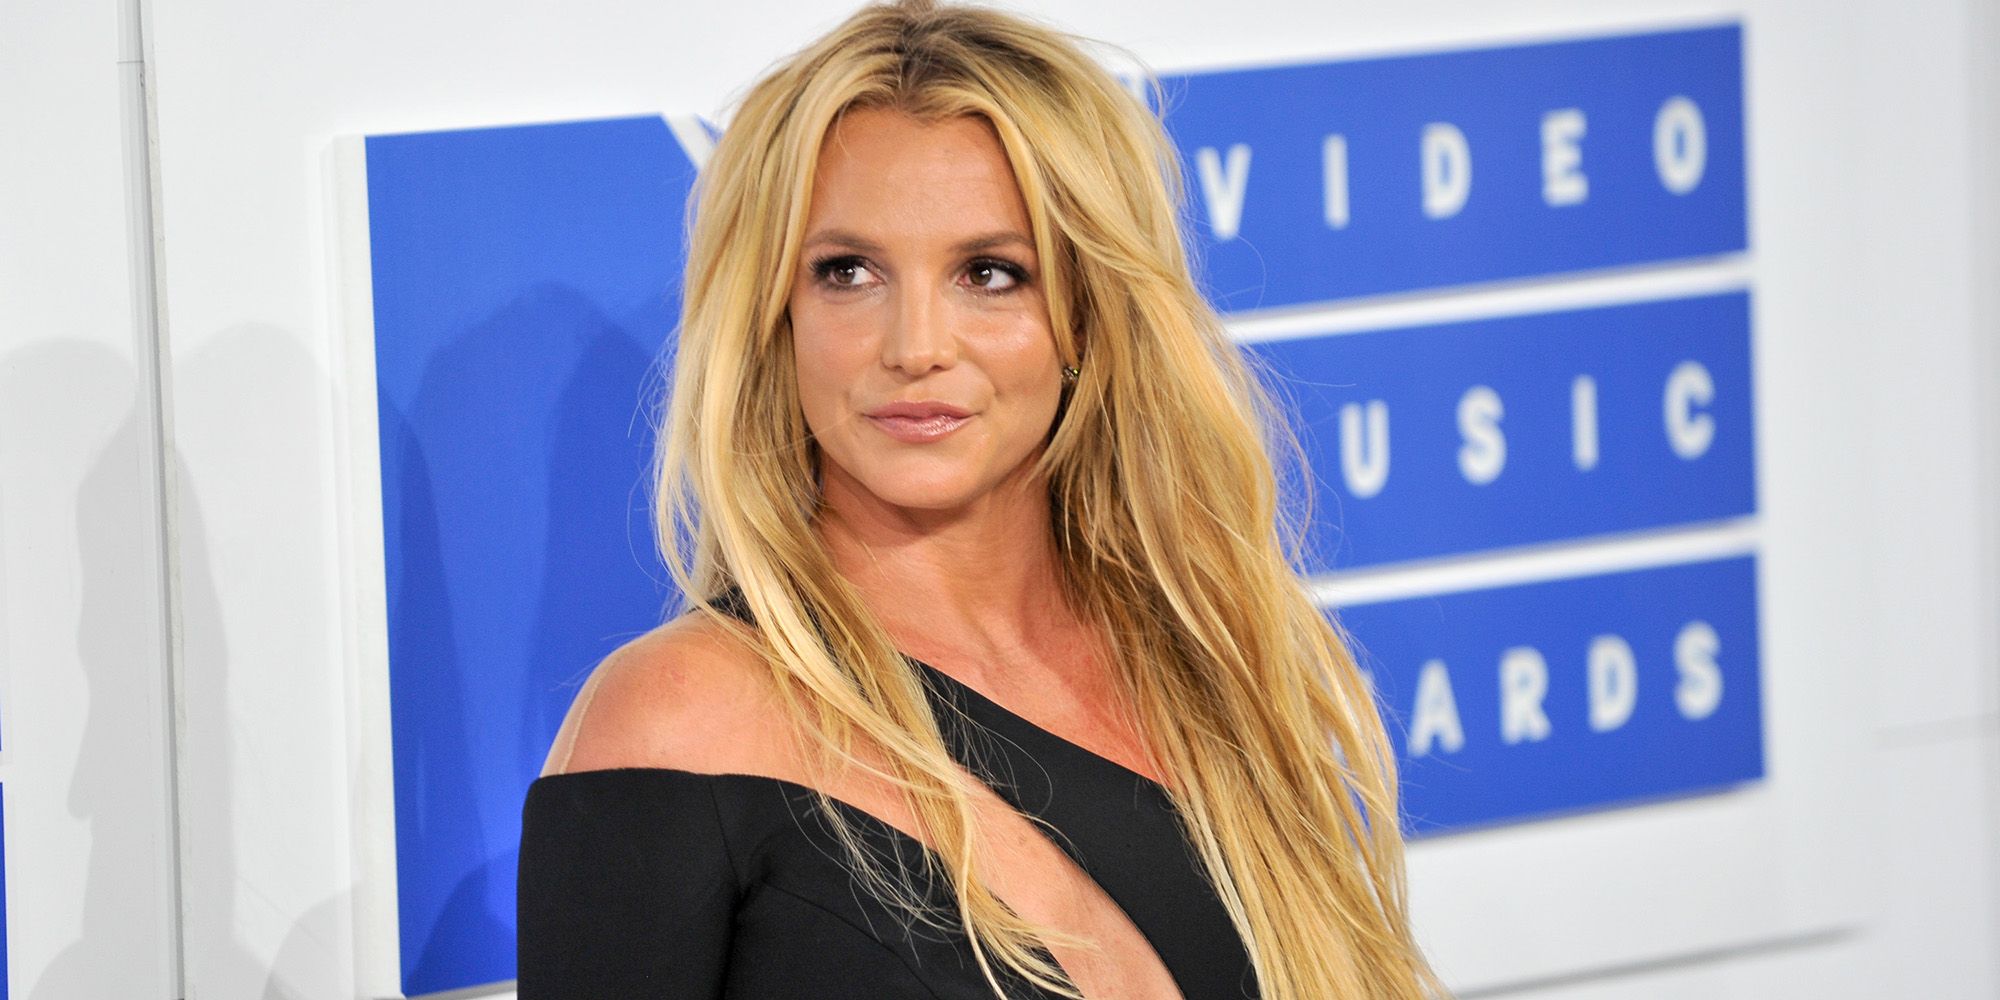 Britney Spears Blowjob - Britney Spears Posted Steamy Photos While Vacationing in London